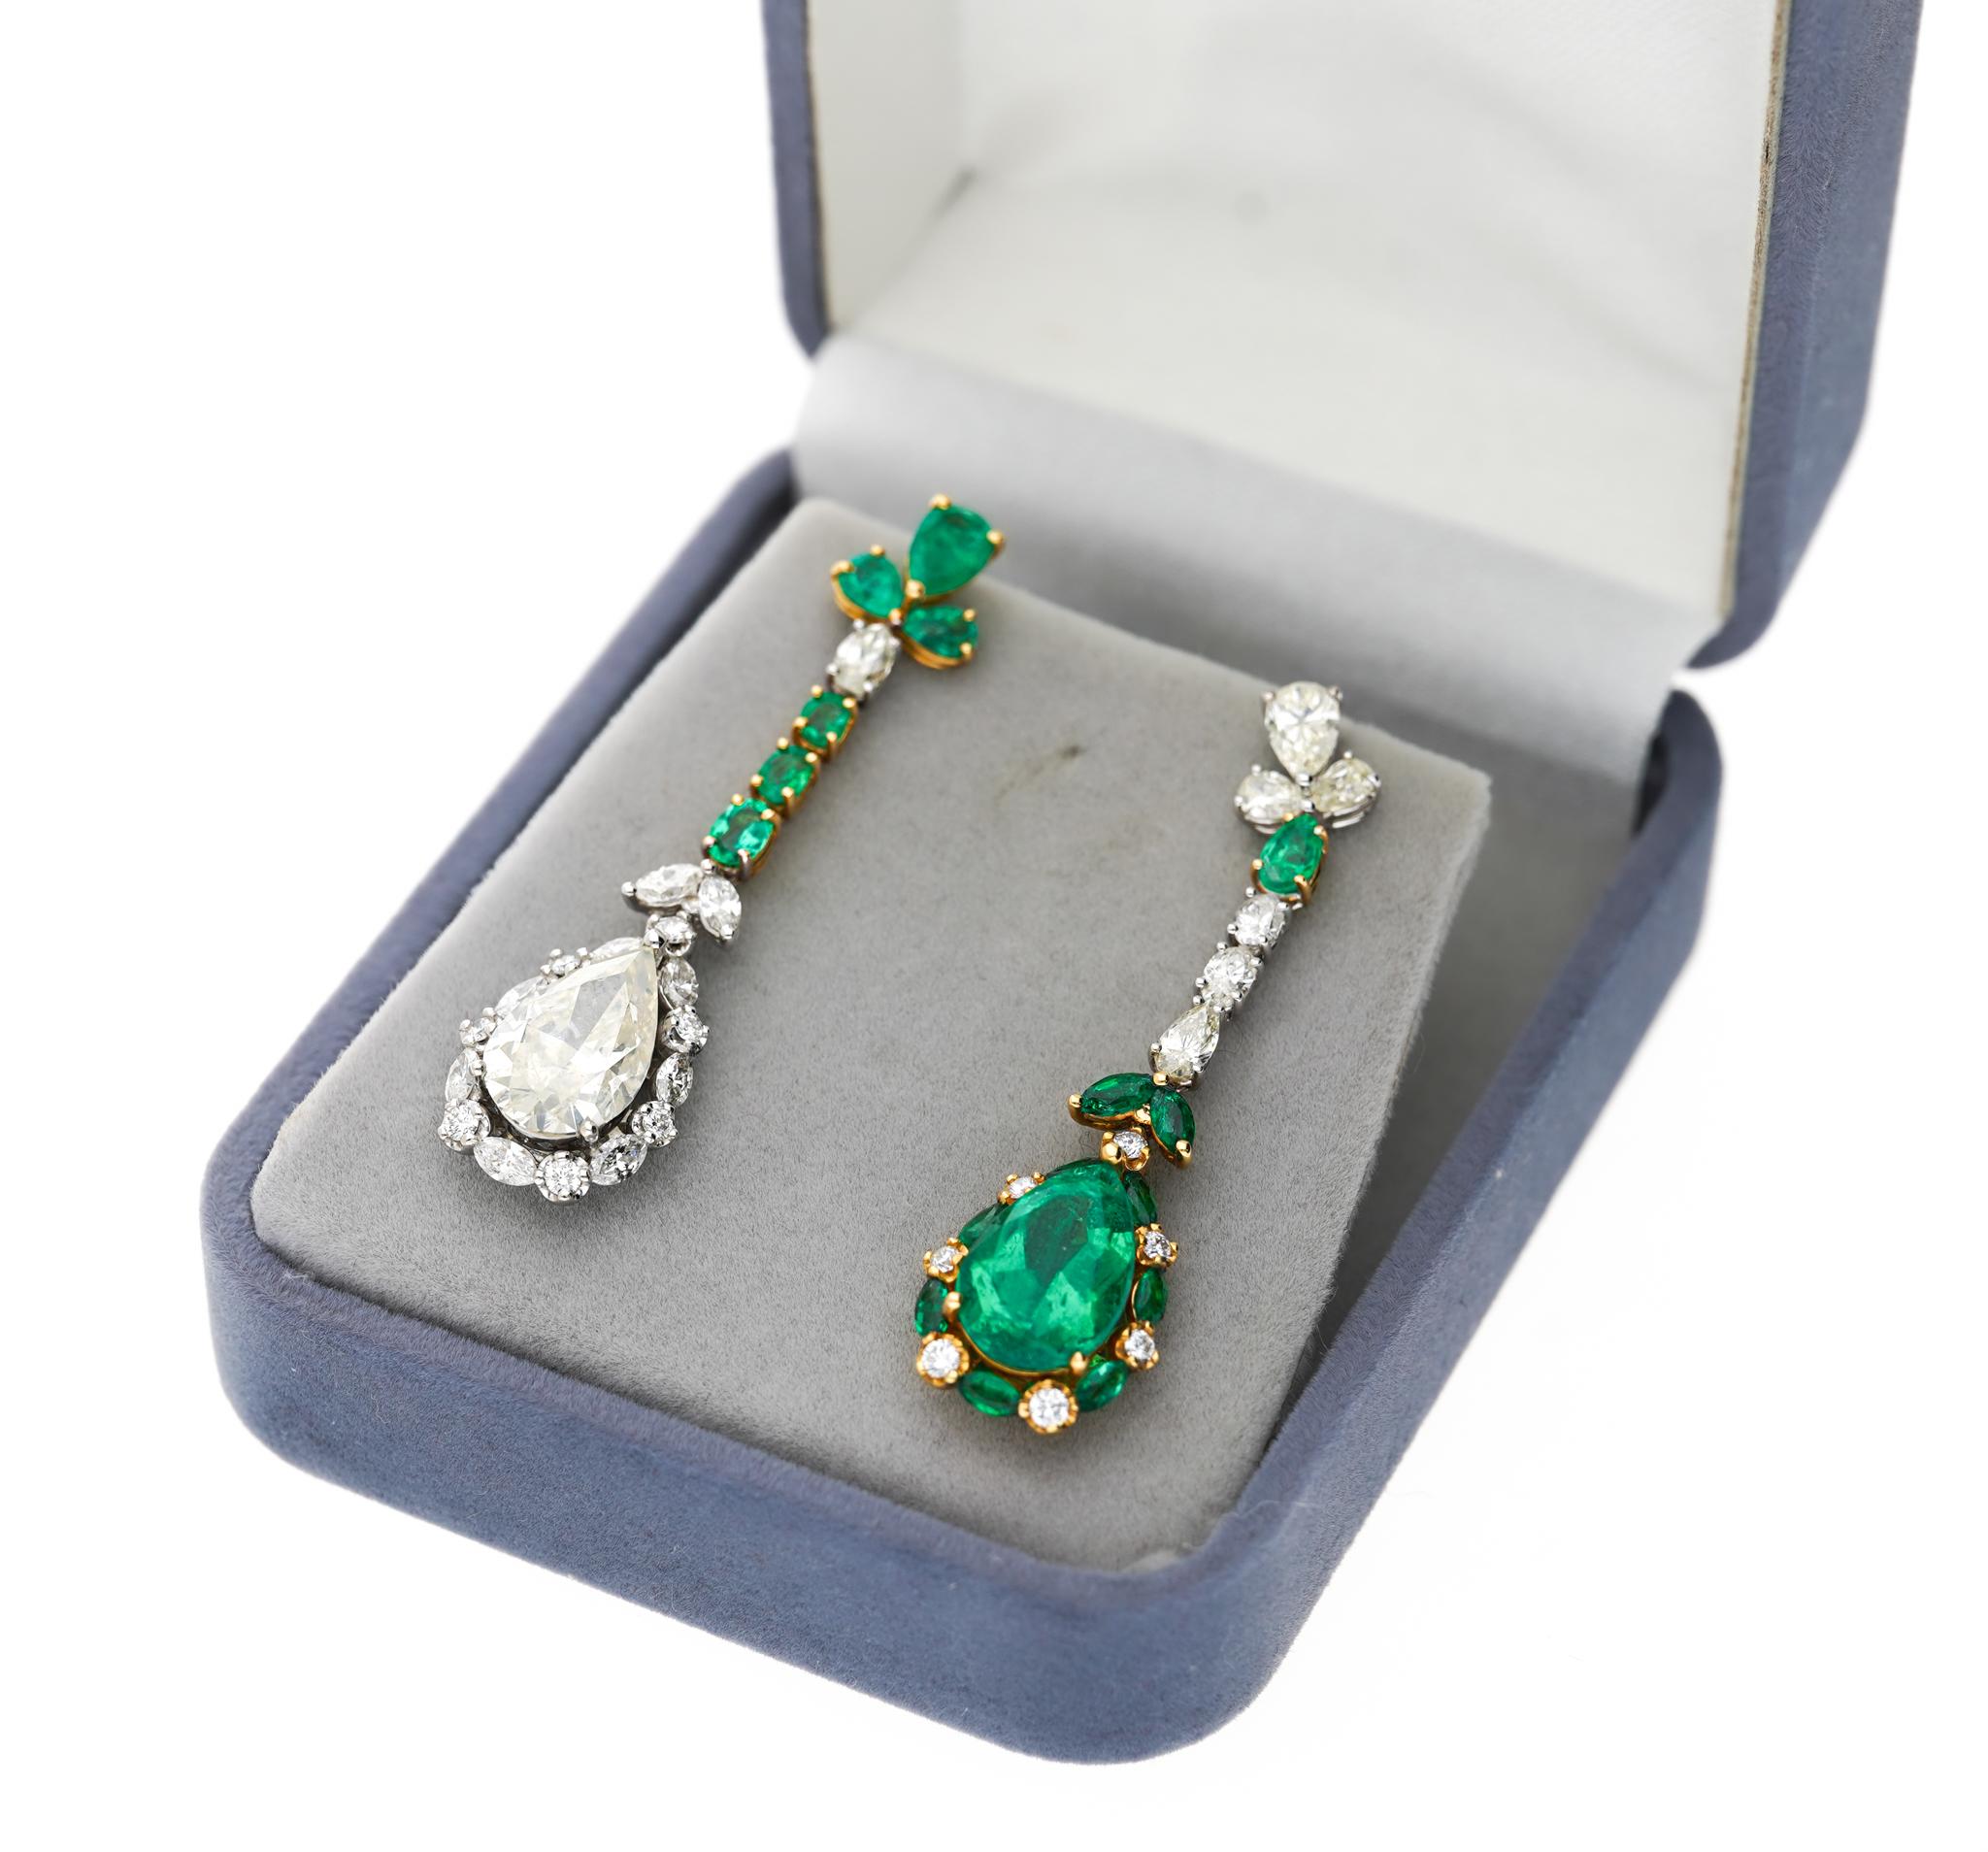 18 karat two-tone solid gold mounts these one-of-a-kind mirrored opposites emerald and diamond drop earrings. Featuring a natural 2.93-carat pear cut Colombian emerald and 3.01 carat natural pear cut diamond center stone on each earring.